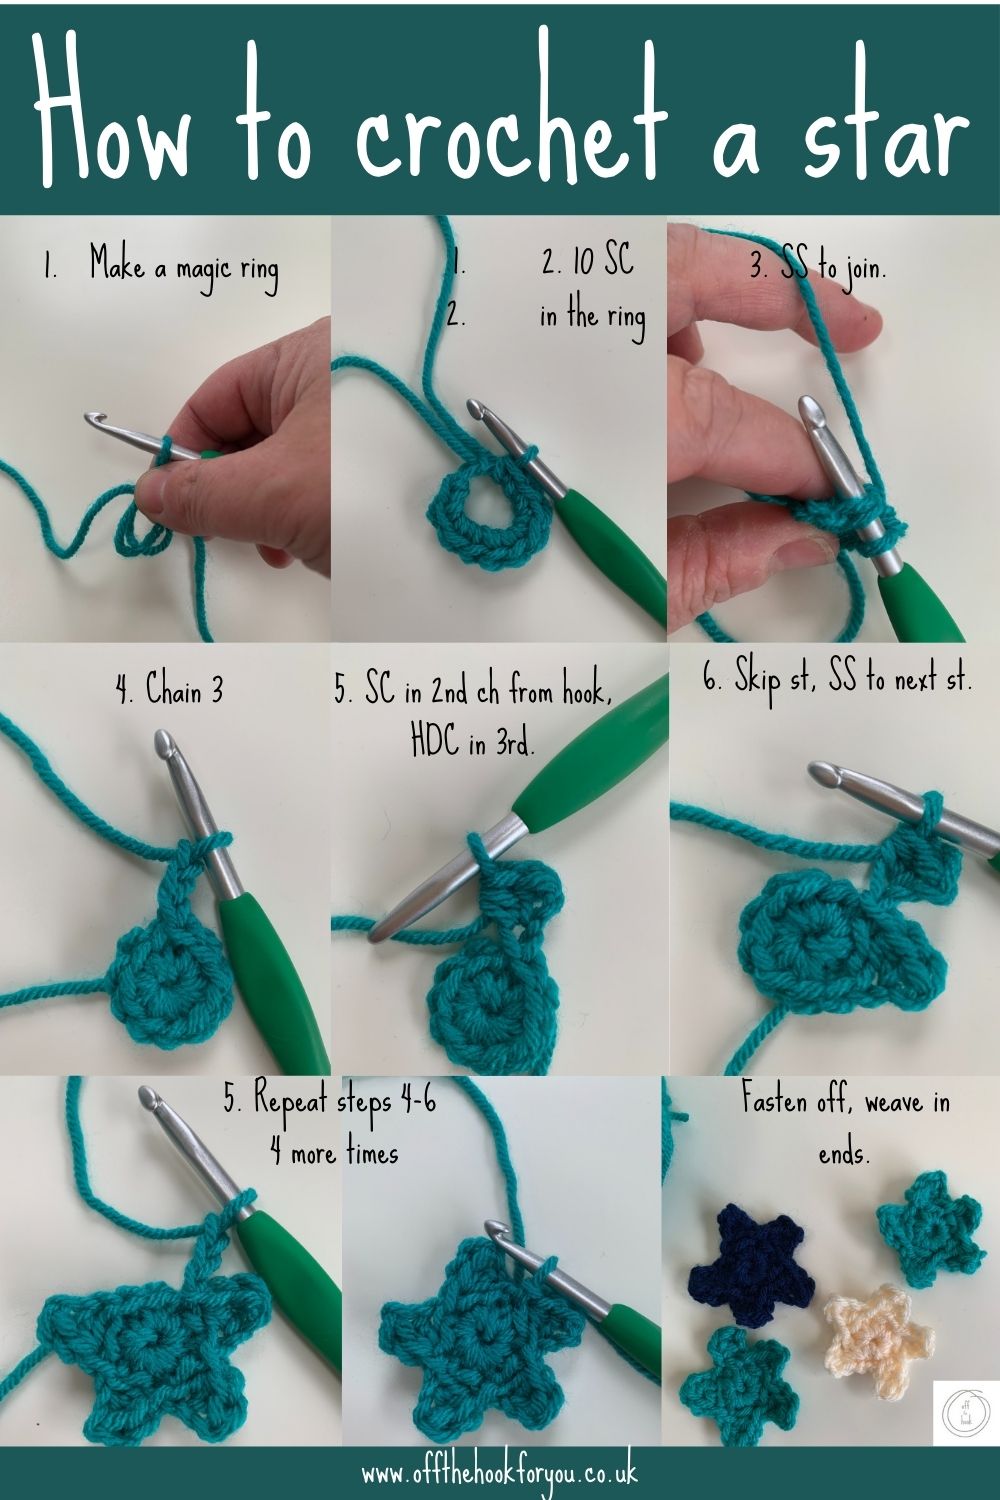 How to crochet a star - easy simple pattern